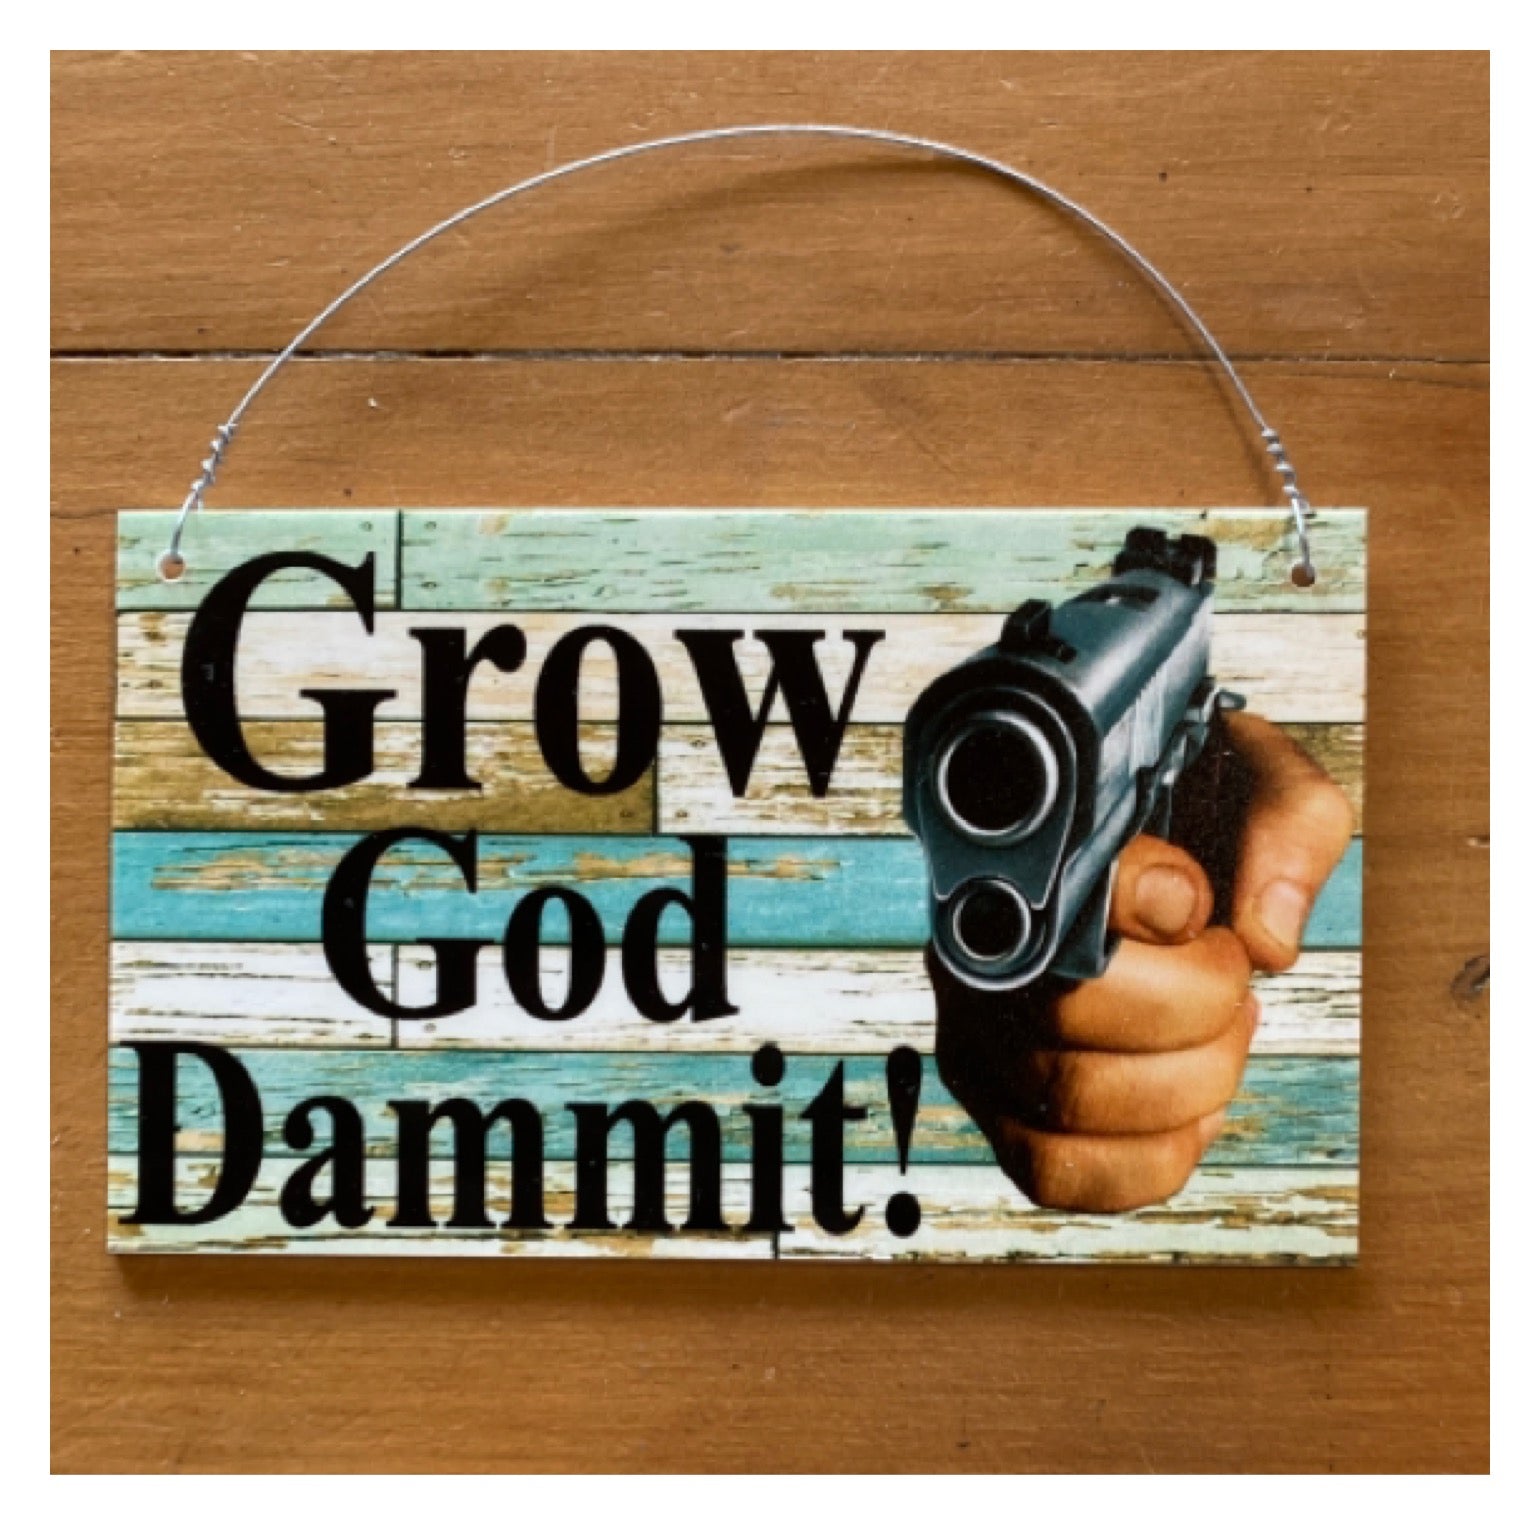 Warning Protection Hands Up Custom Sign - The Renmy Store Homewares & Gifts 